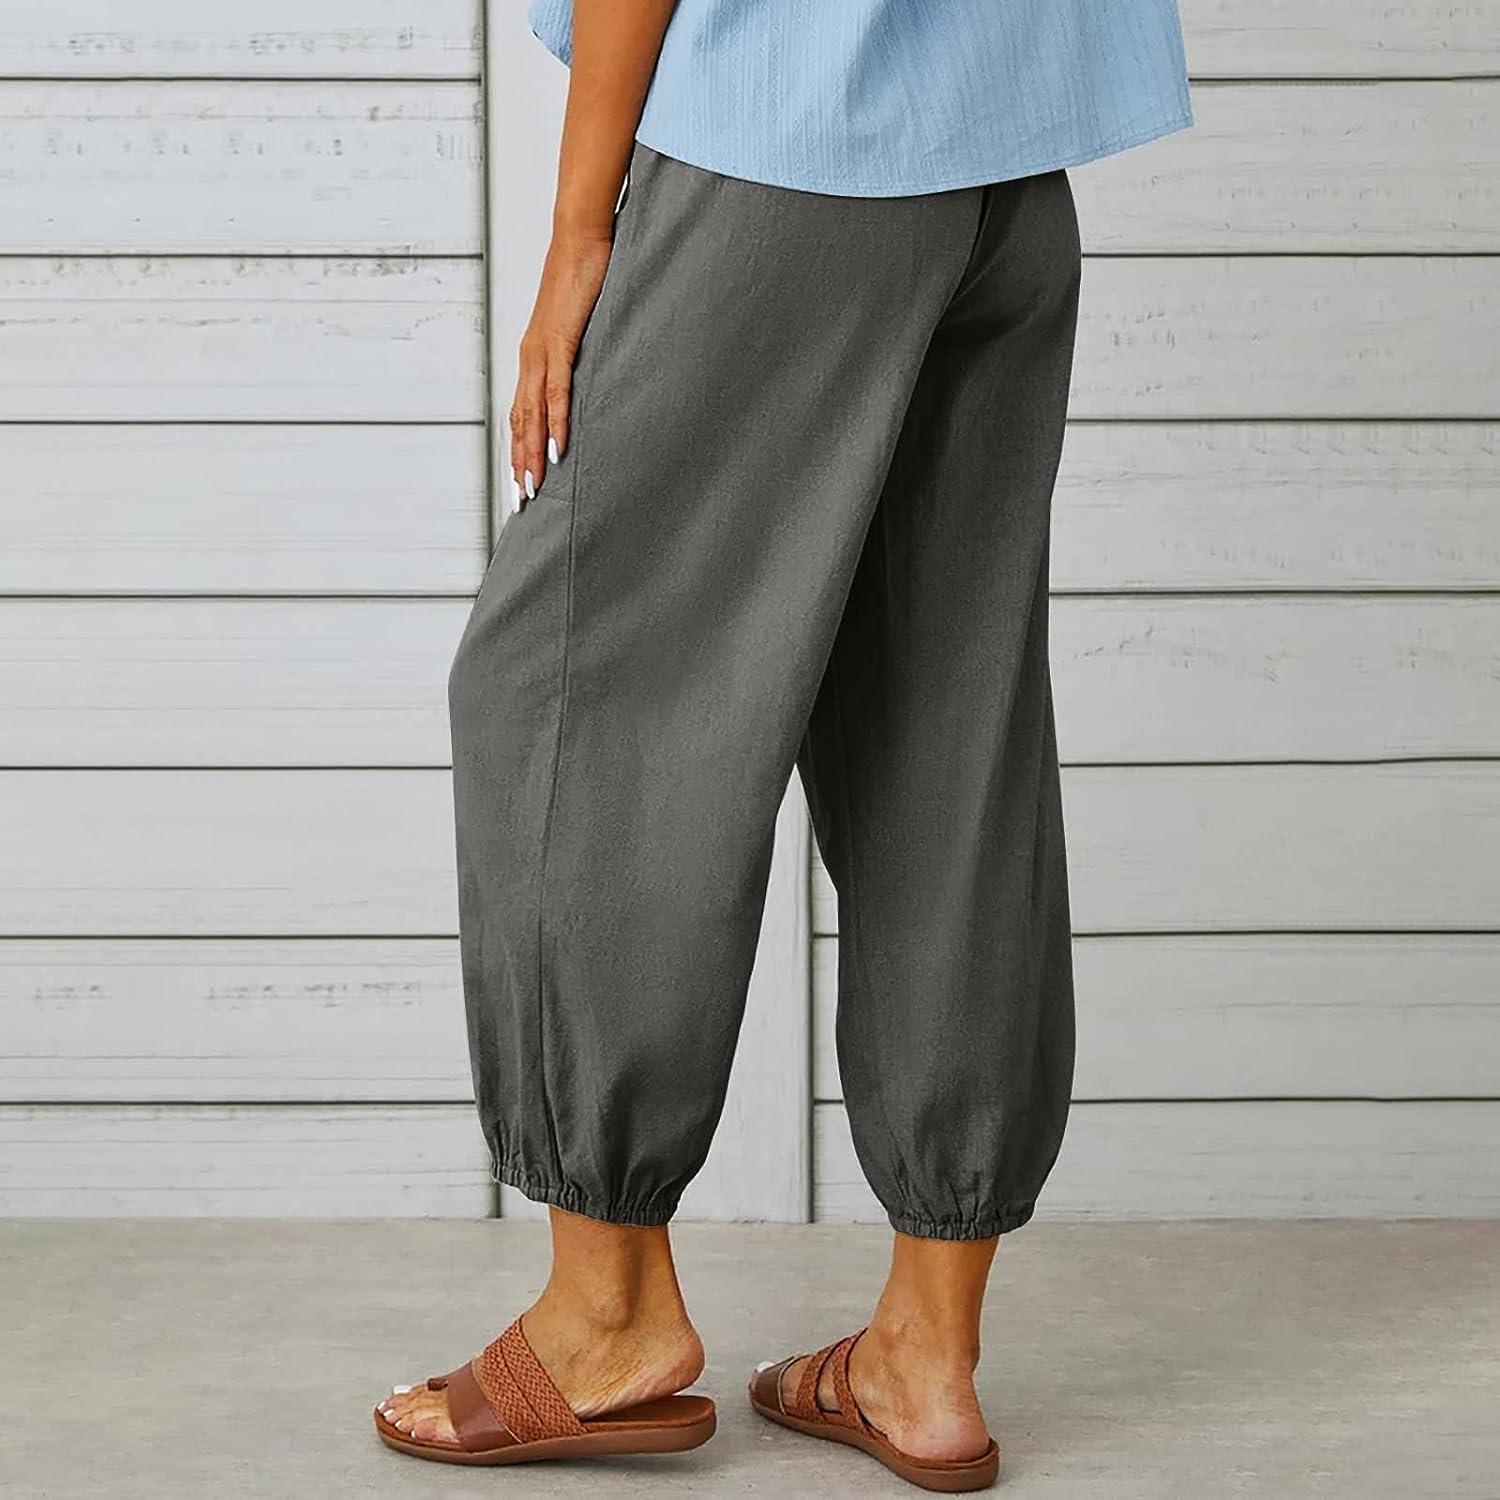 KAAUSE Linen Pants for Women Loose Fit, Womens Casual Loose Pants